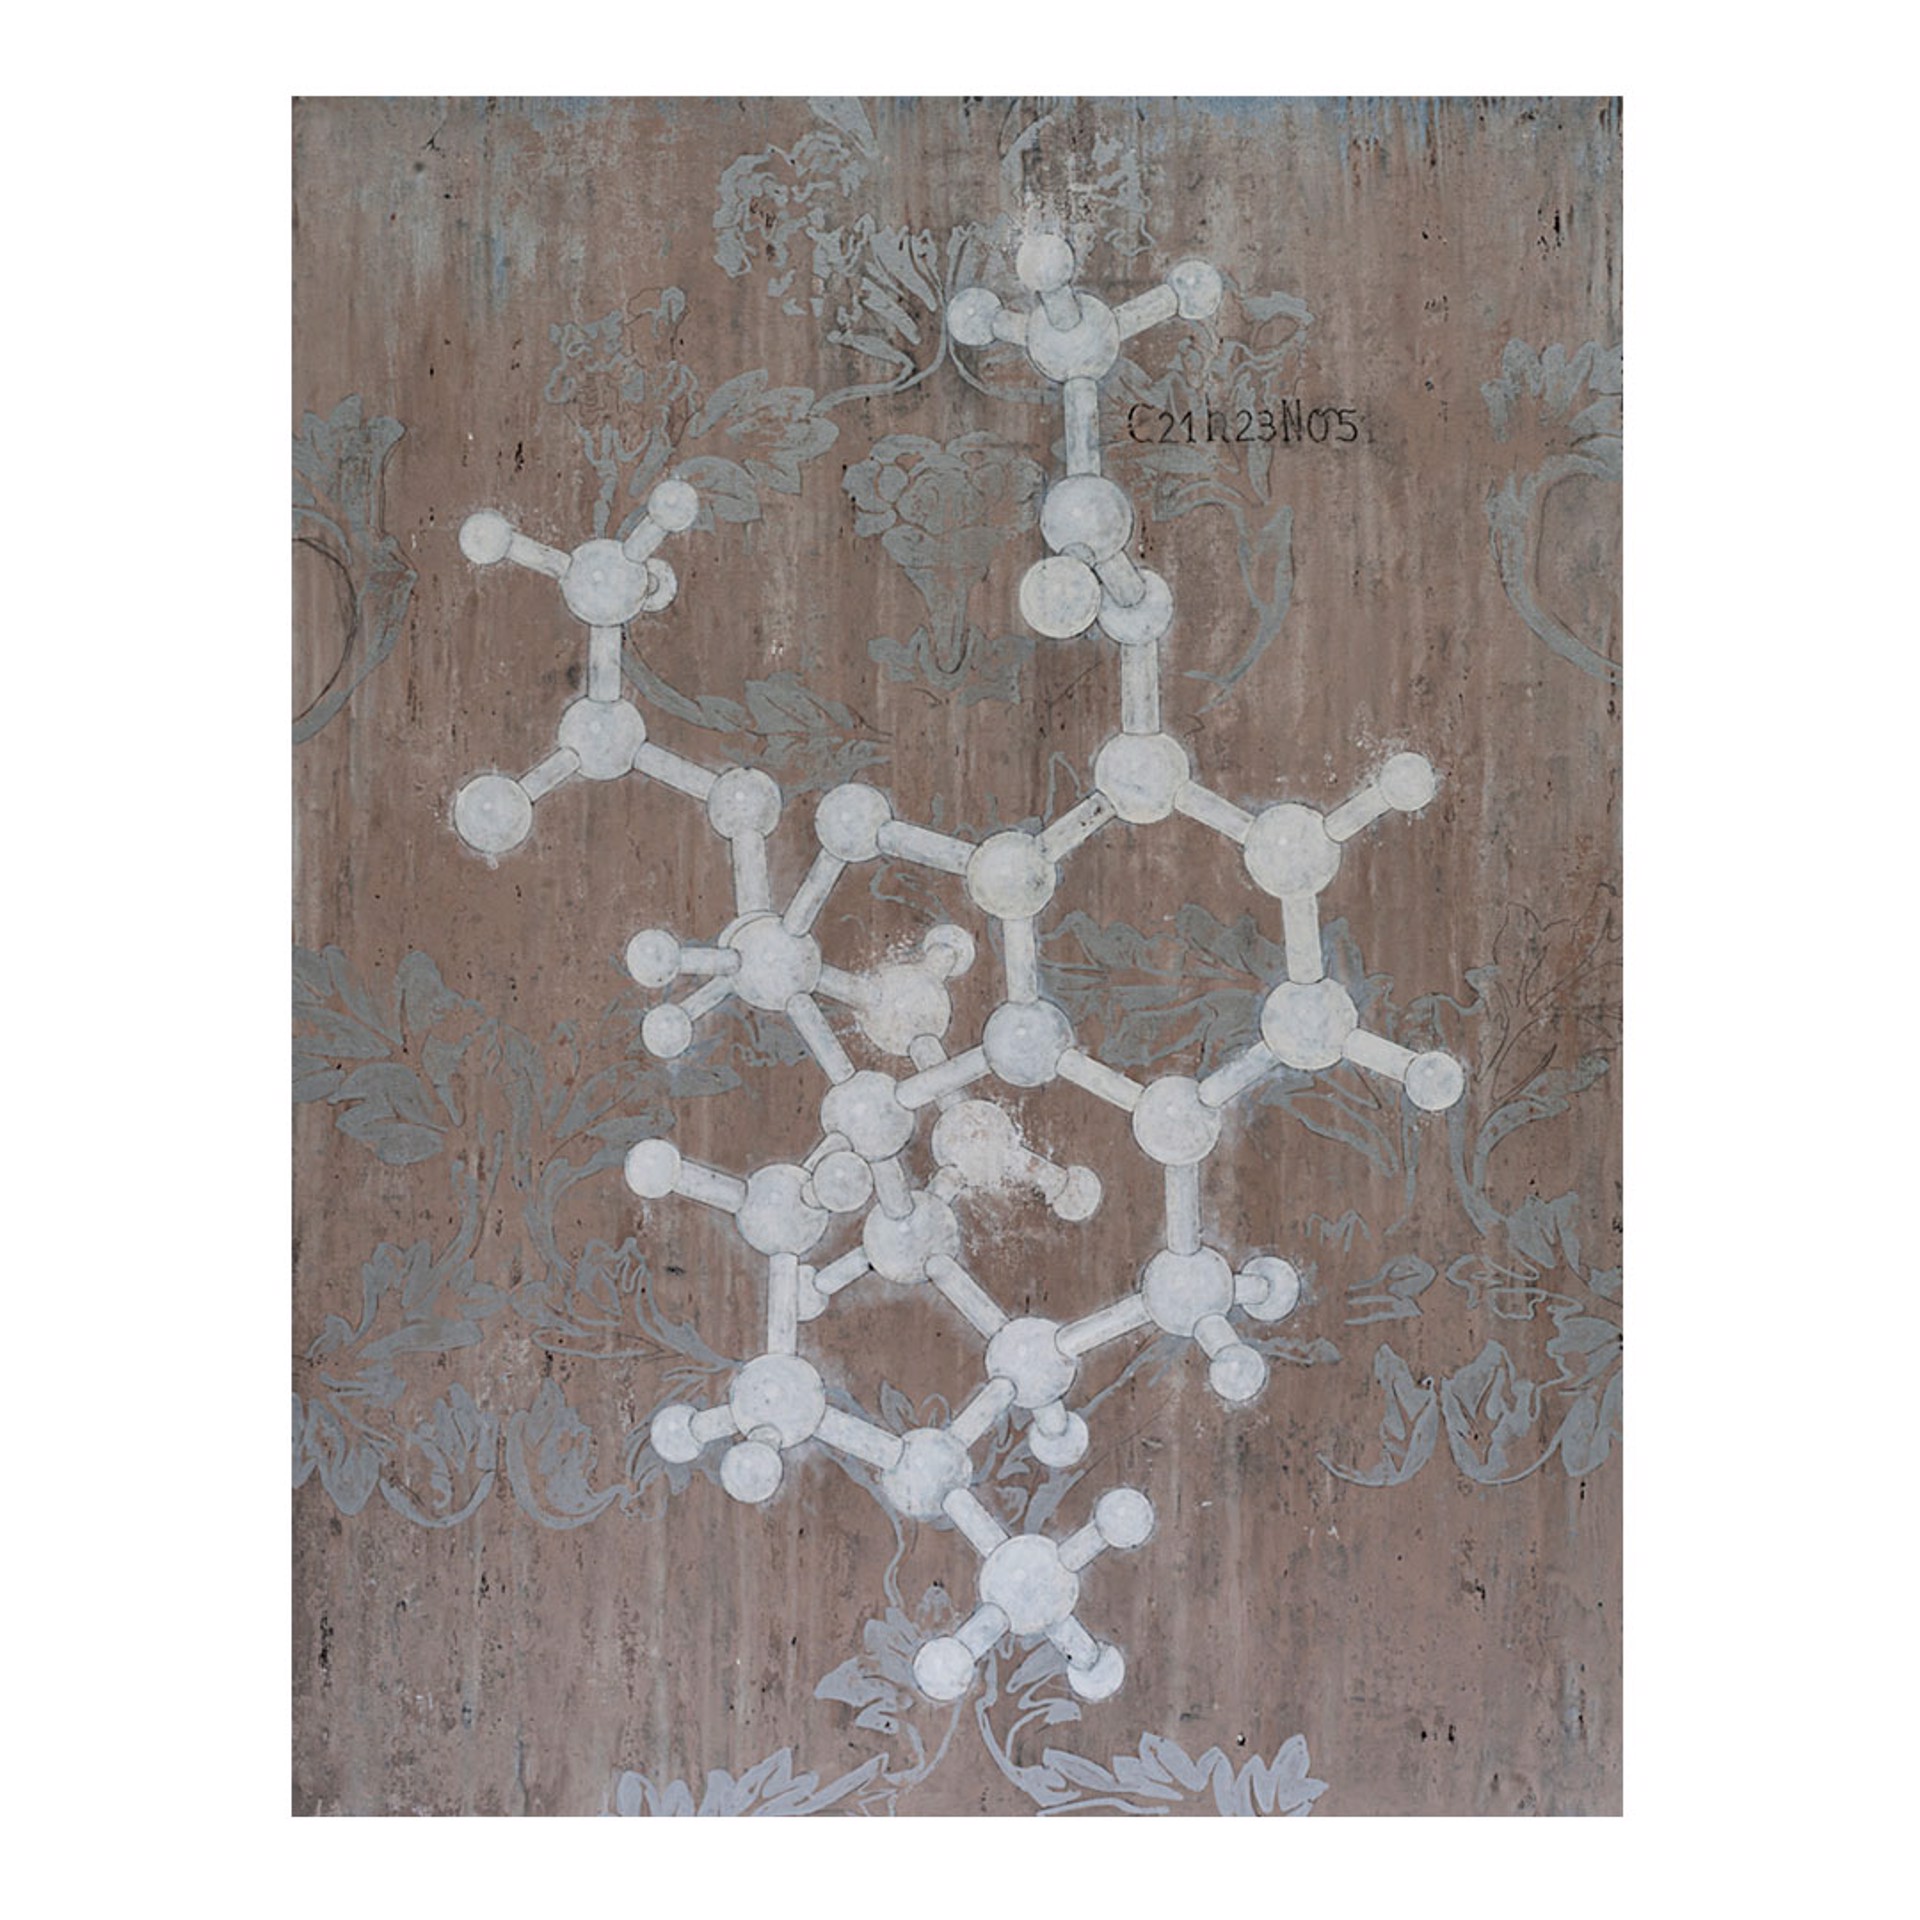 Ando-Morphine Molecular Structure by Dominique Rousserie by St Barth Artwork